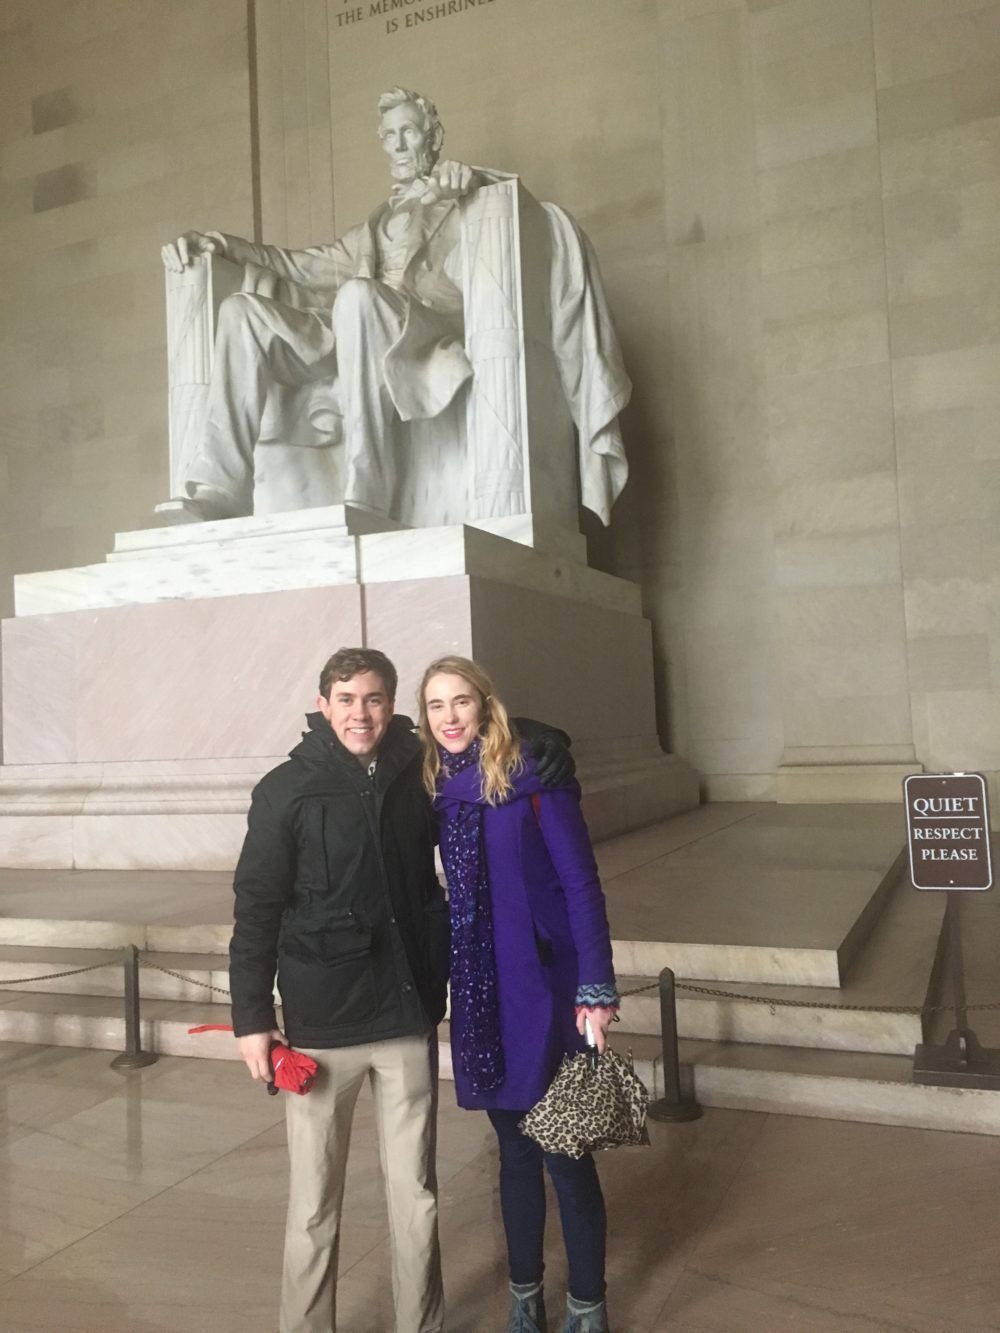 My brother Max and I in front of the giant statue of Abraham Lincoln inside the Lincoln Memorial in Washington D.C.